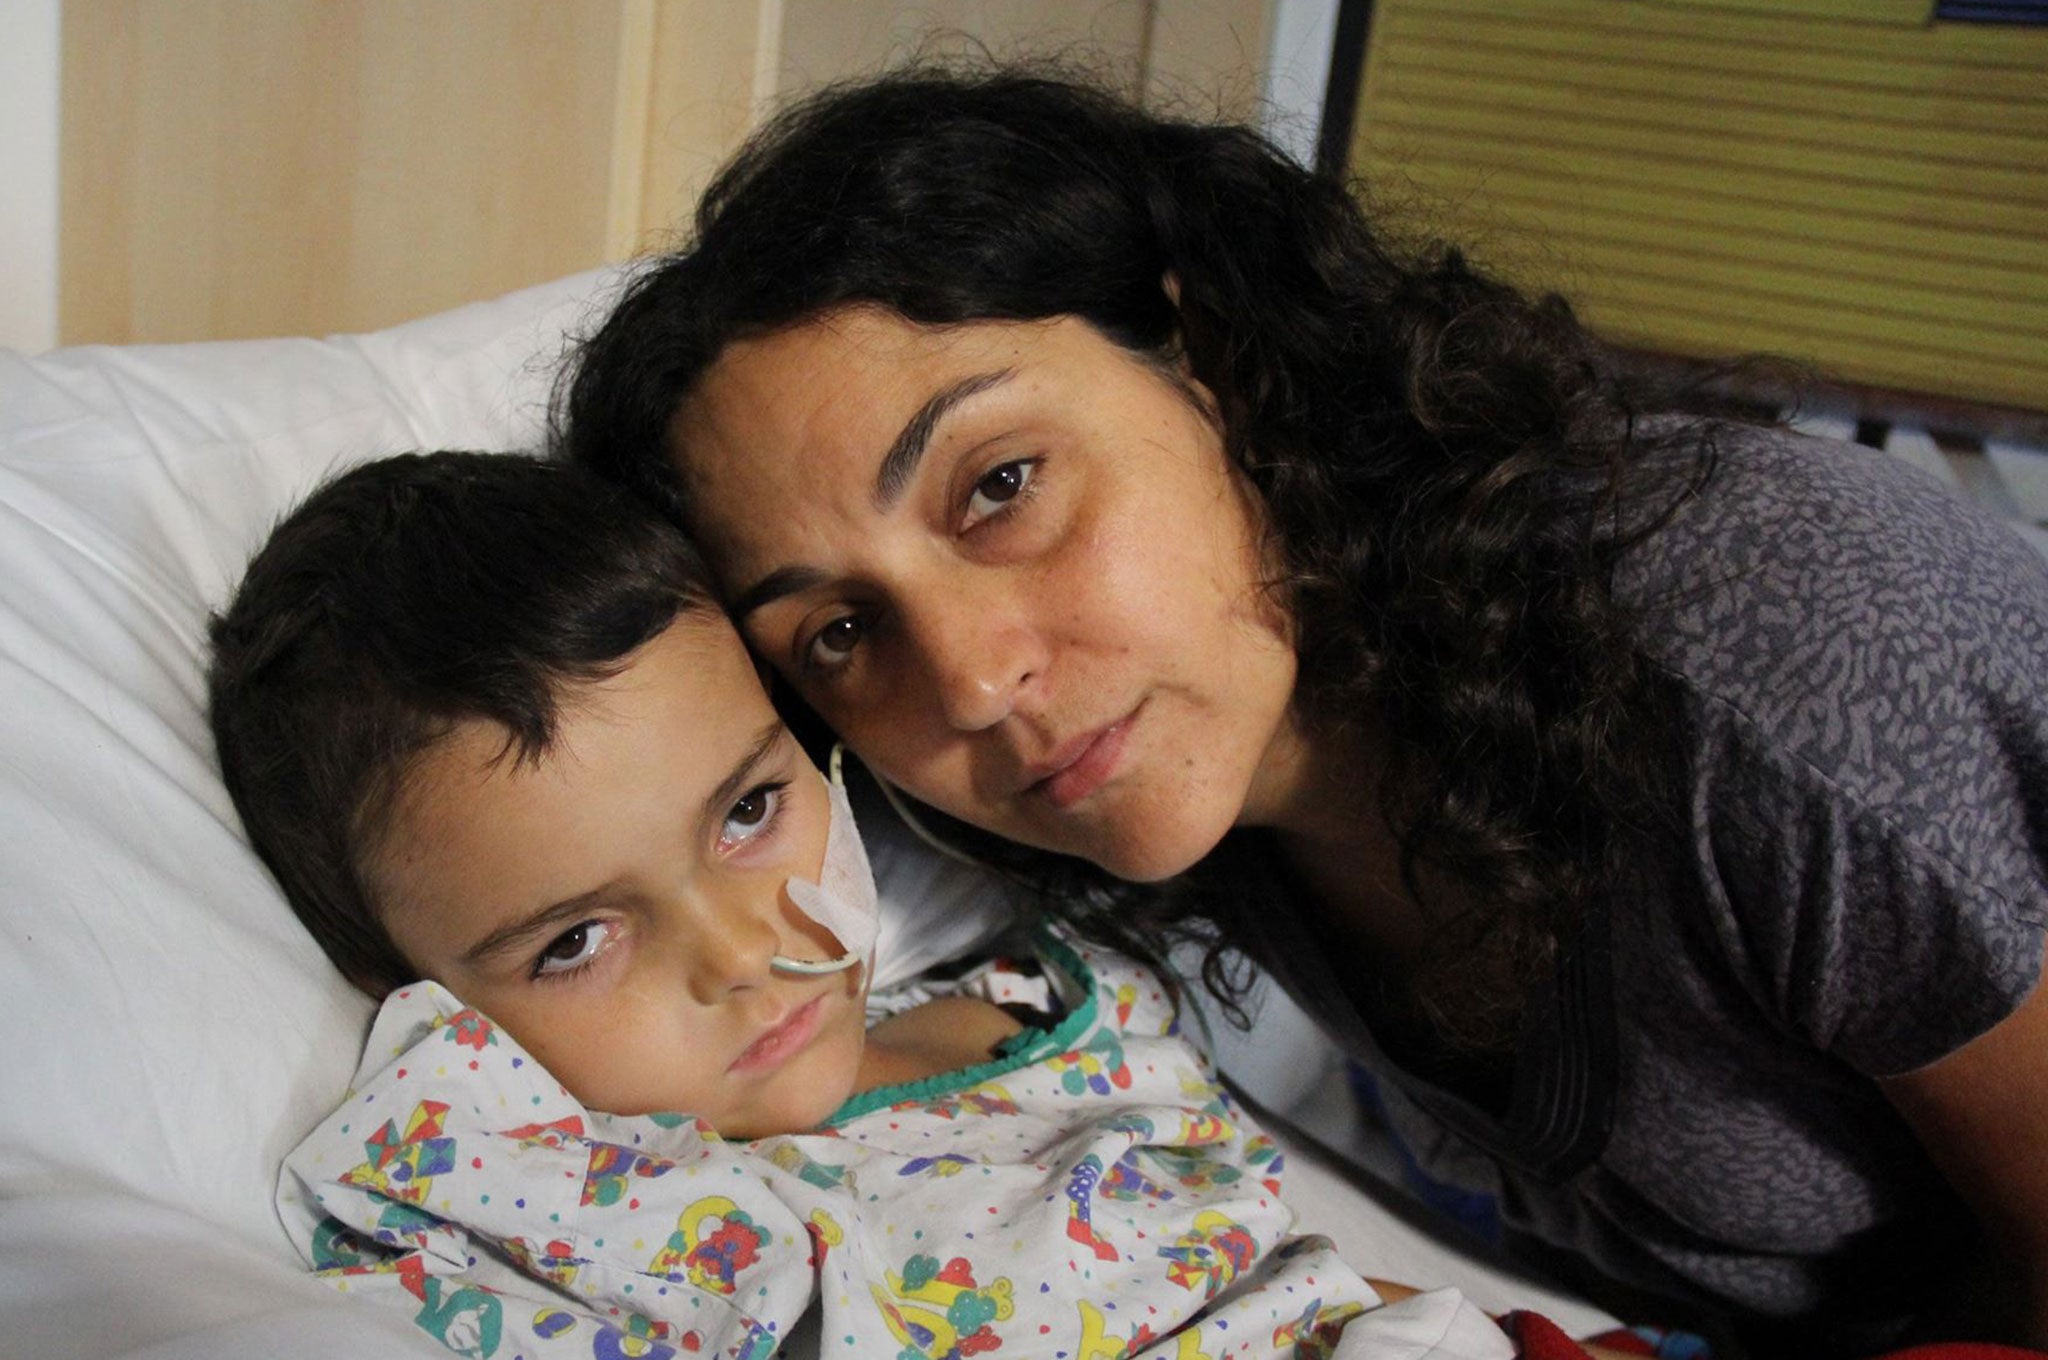 Ashya was receiving treatment for a brain tumour